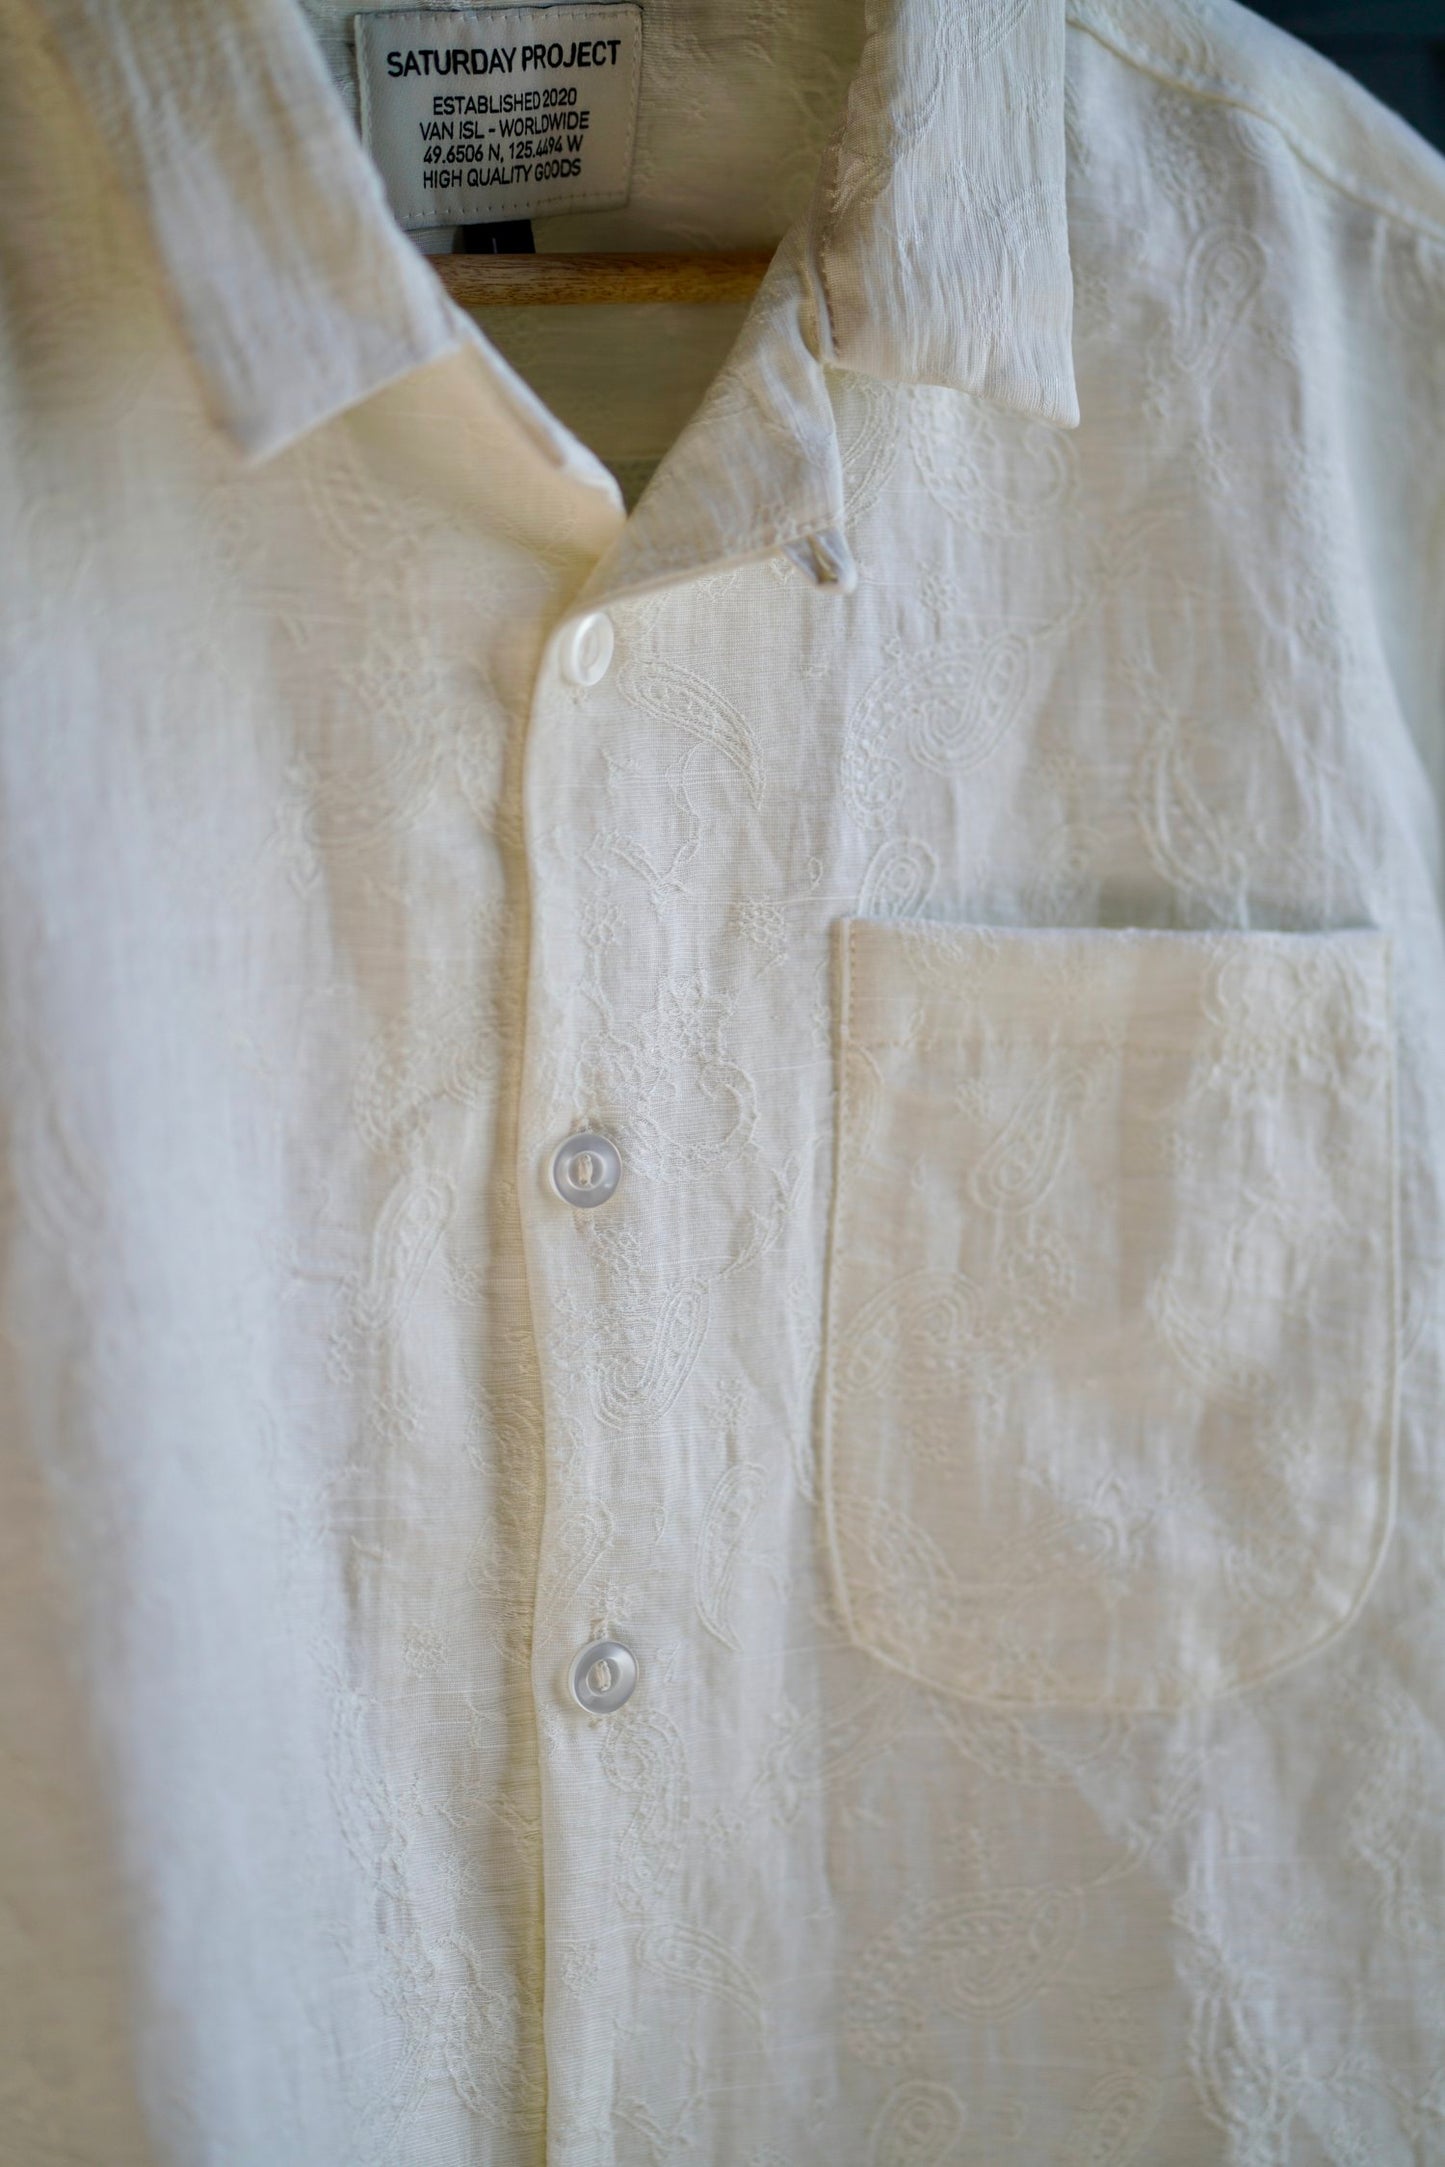 The Saturday Project - Leisure Shirt - Linen